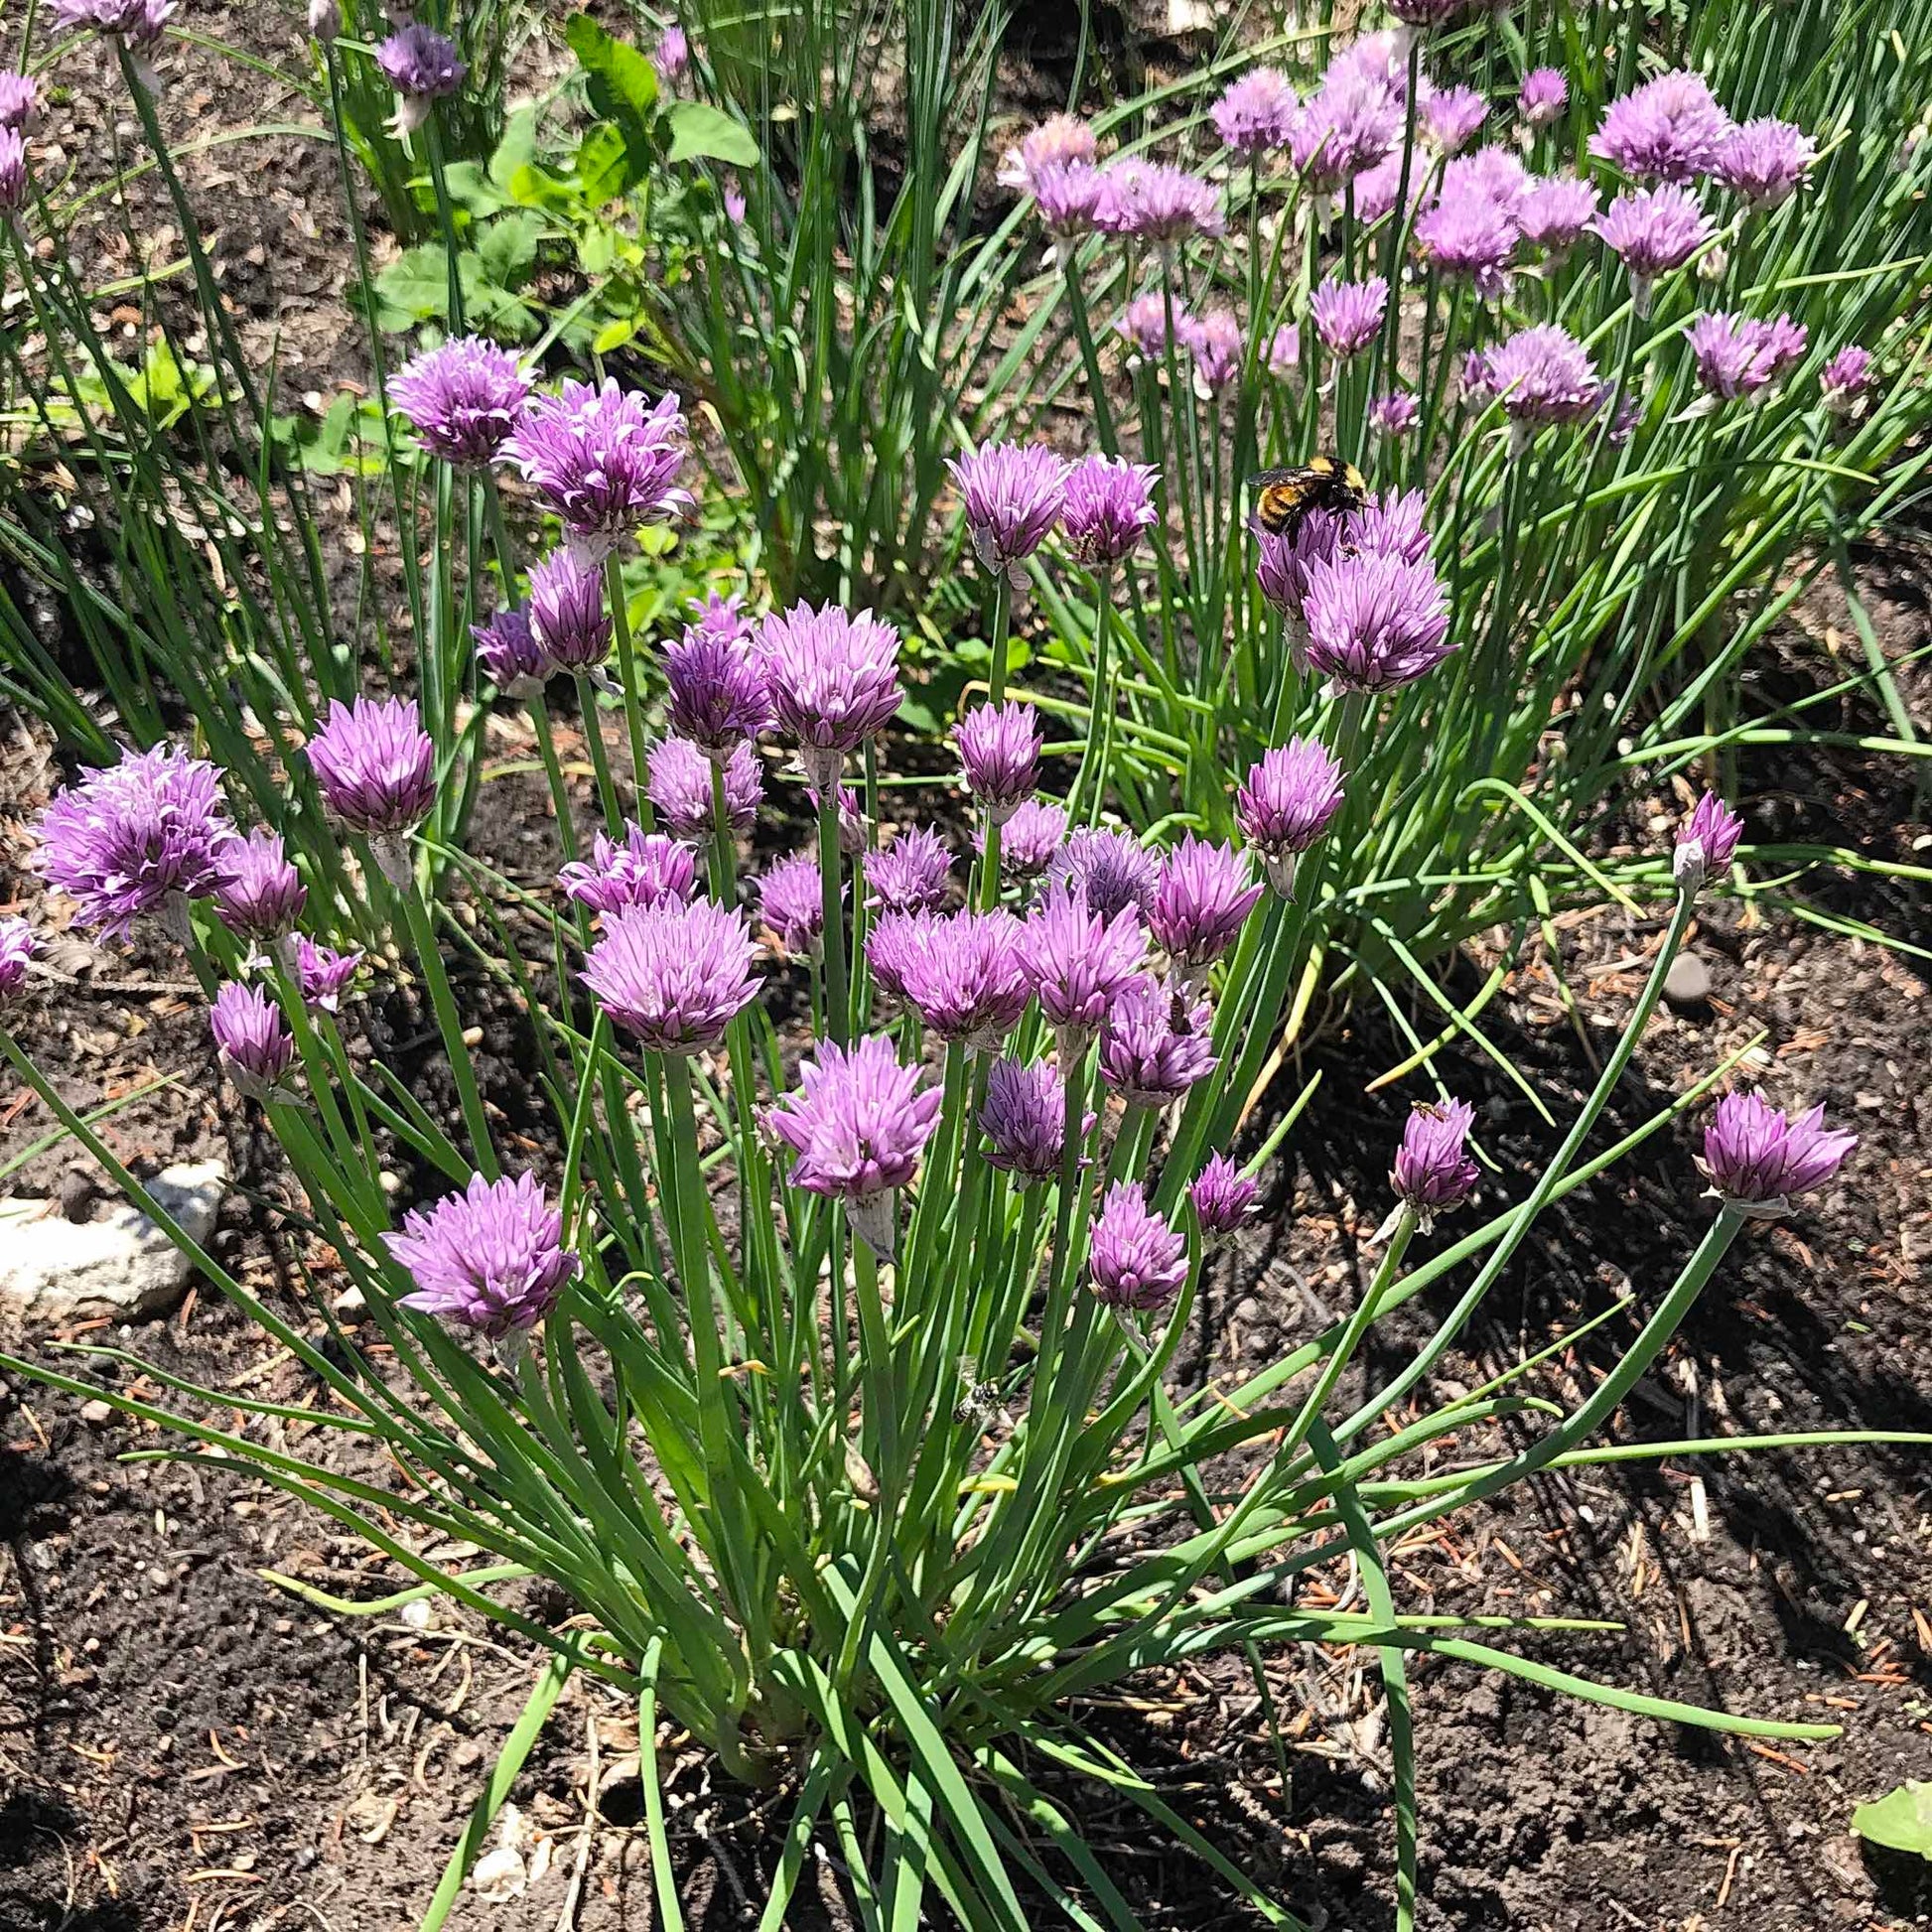 Clump of chives being visited by a bee.